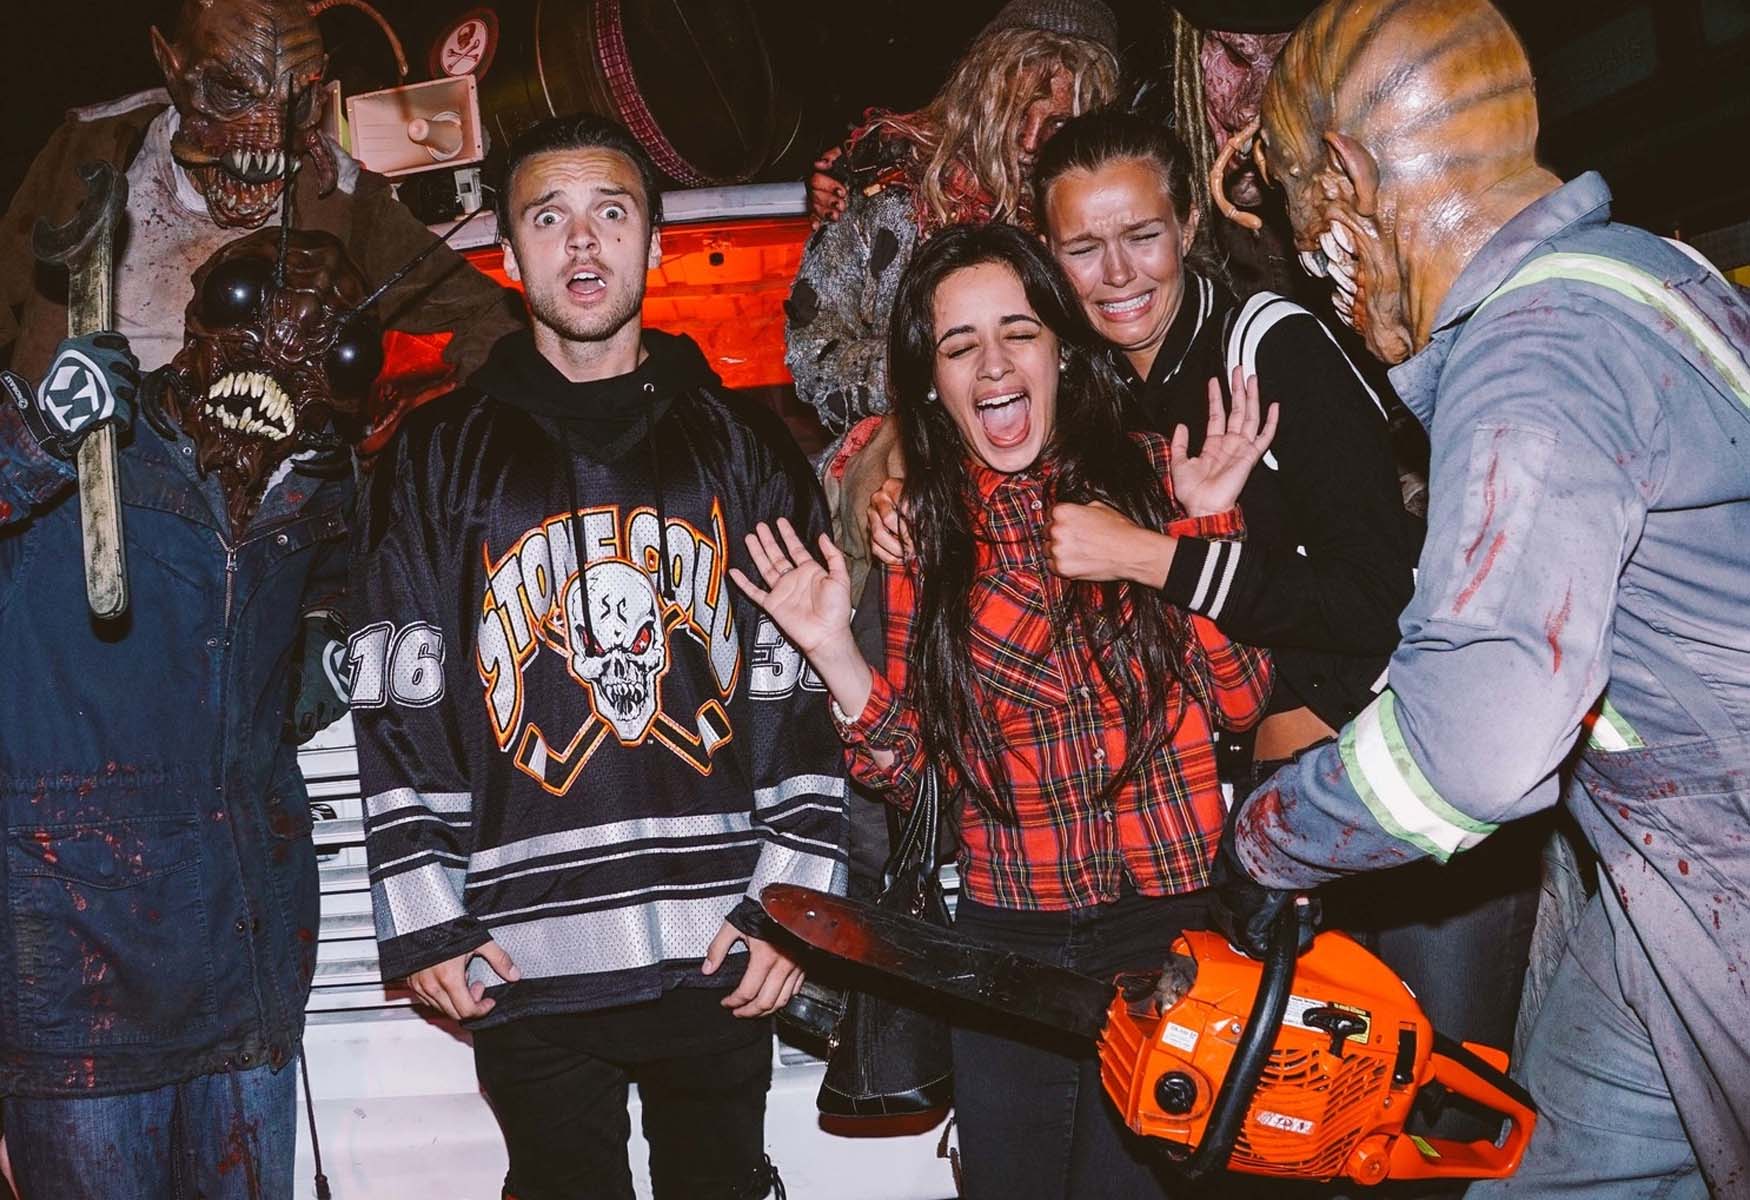 Celebs Brave The Scares At Halloween Horror Nights: Scary Fun Photos!